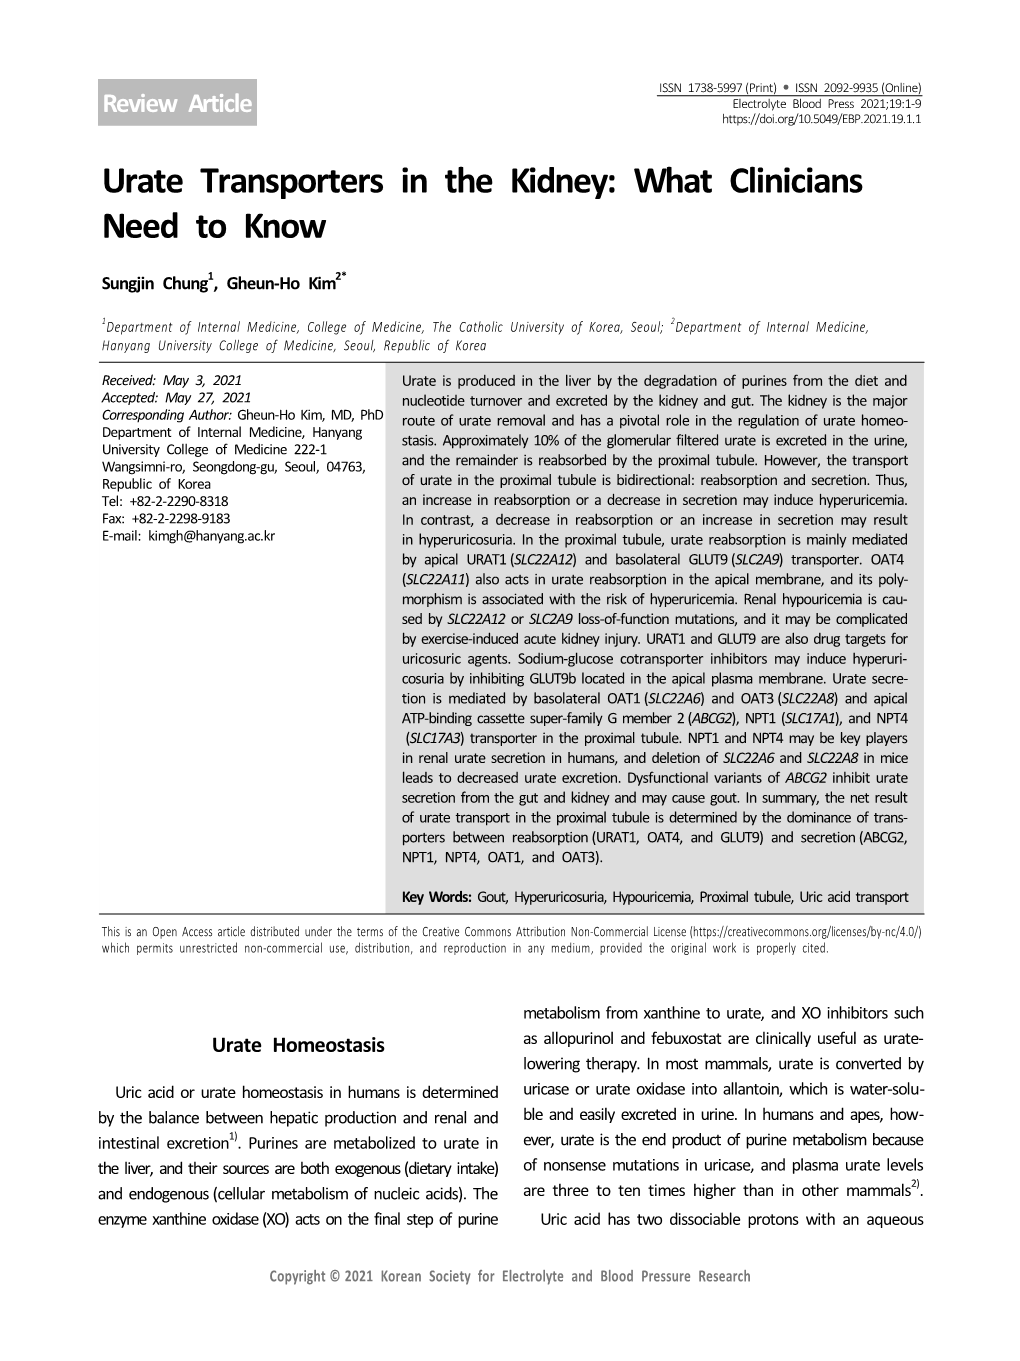 Urate Transporters in the Kidney: What Clinicians Need to Know